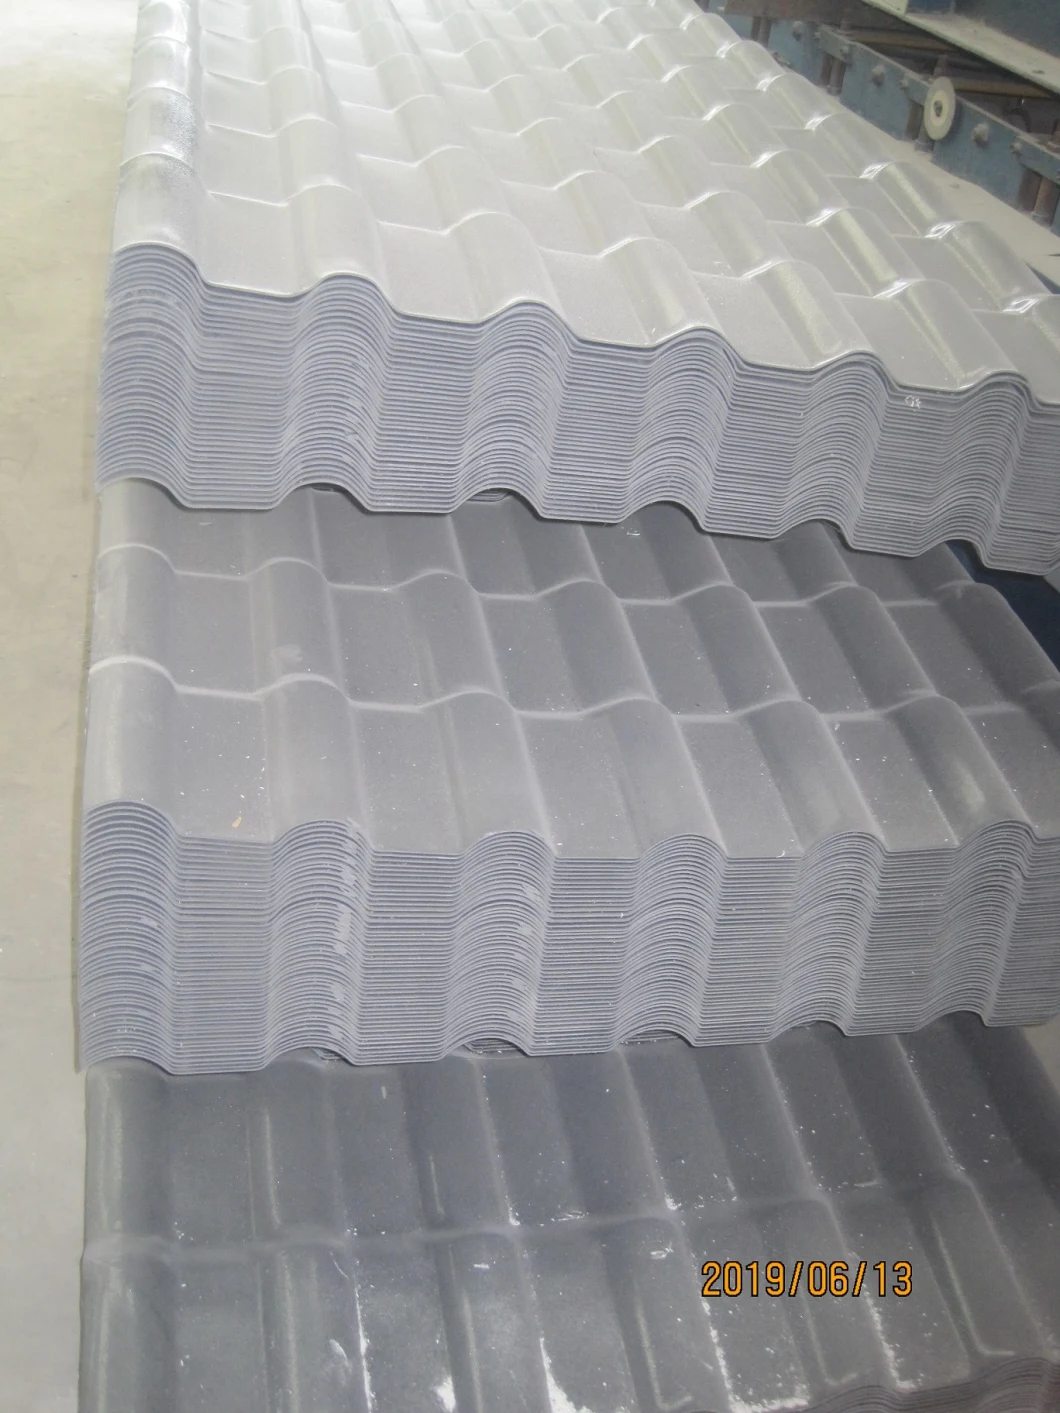 Plastic Glazed Resin Synthetic Roofing Wave Tile, Resin Roof Panel, Resin Roof Sheet